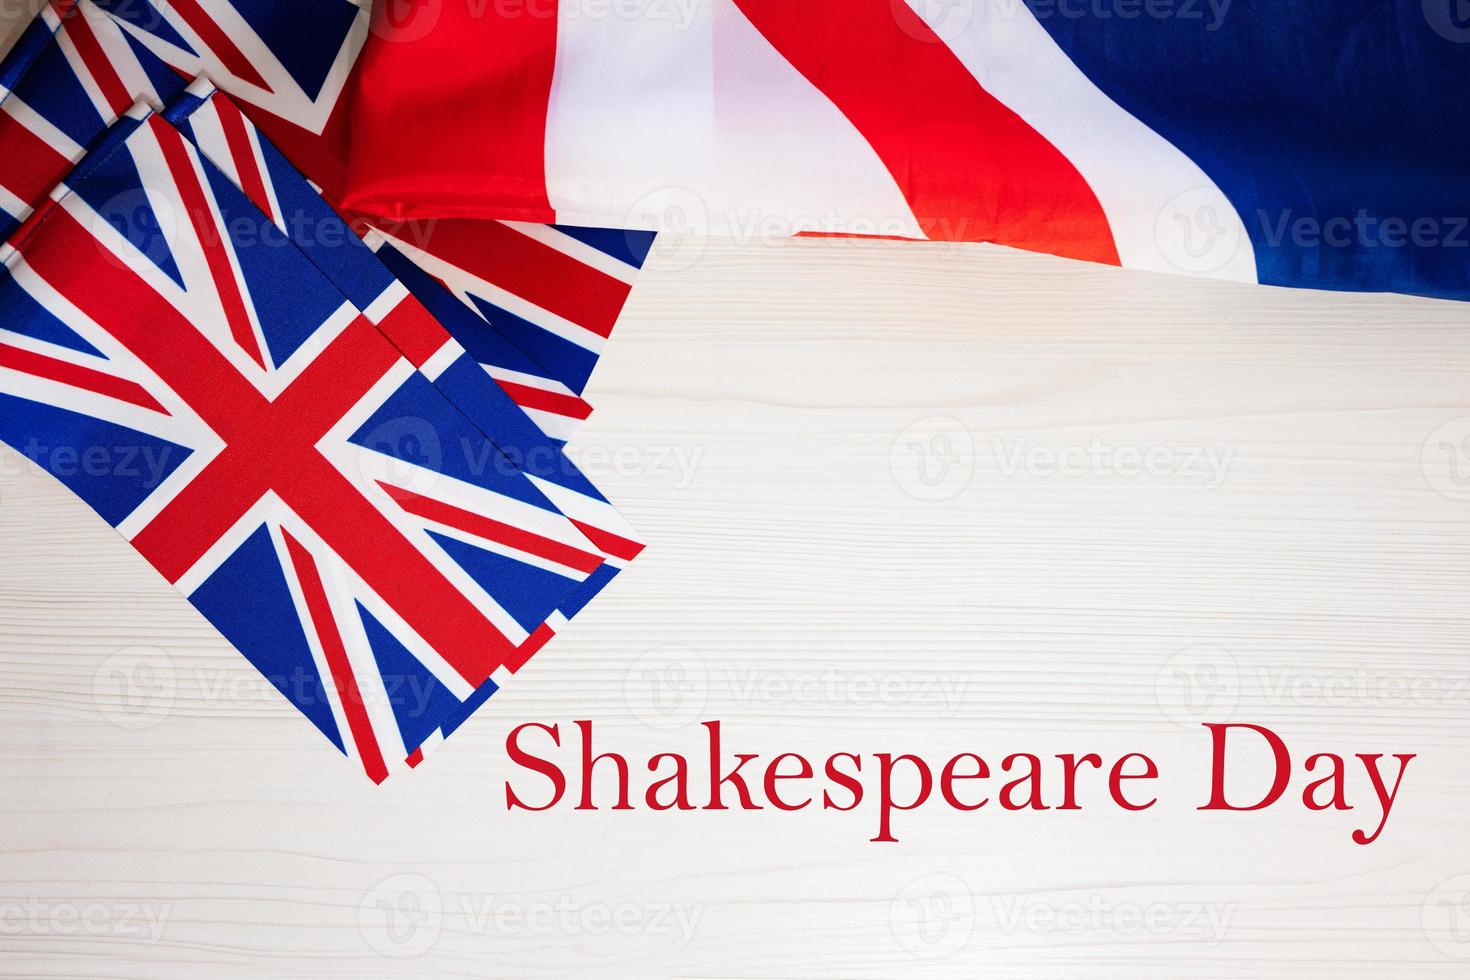 Shakespeare Day. British holidays concept. Holiday in United Kingdom. Great Britain flag background. photo